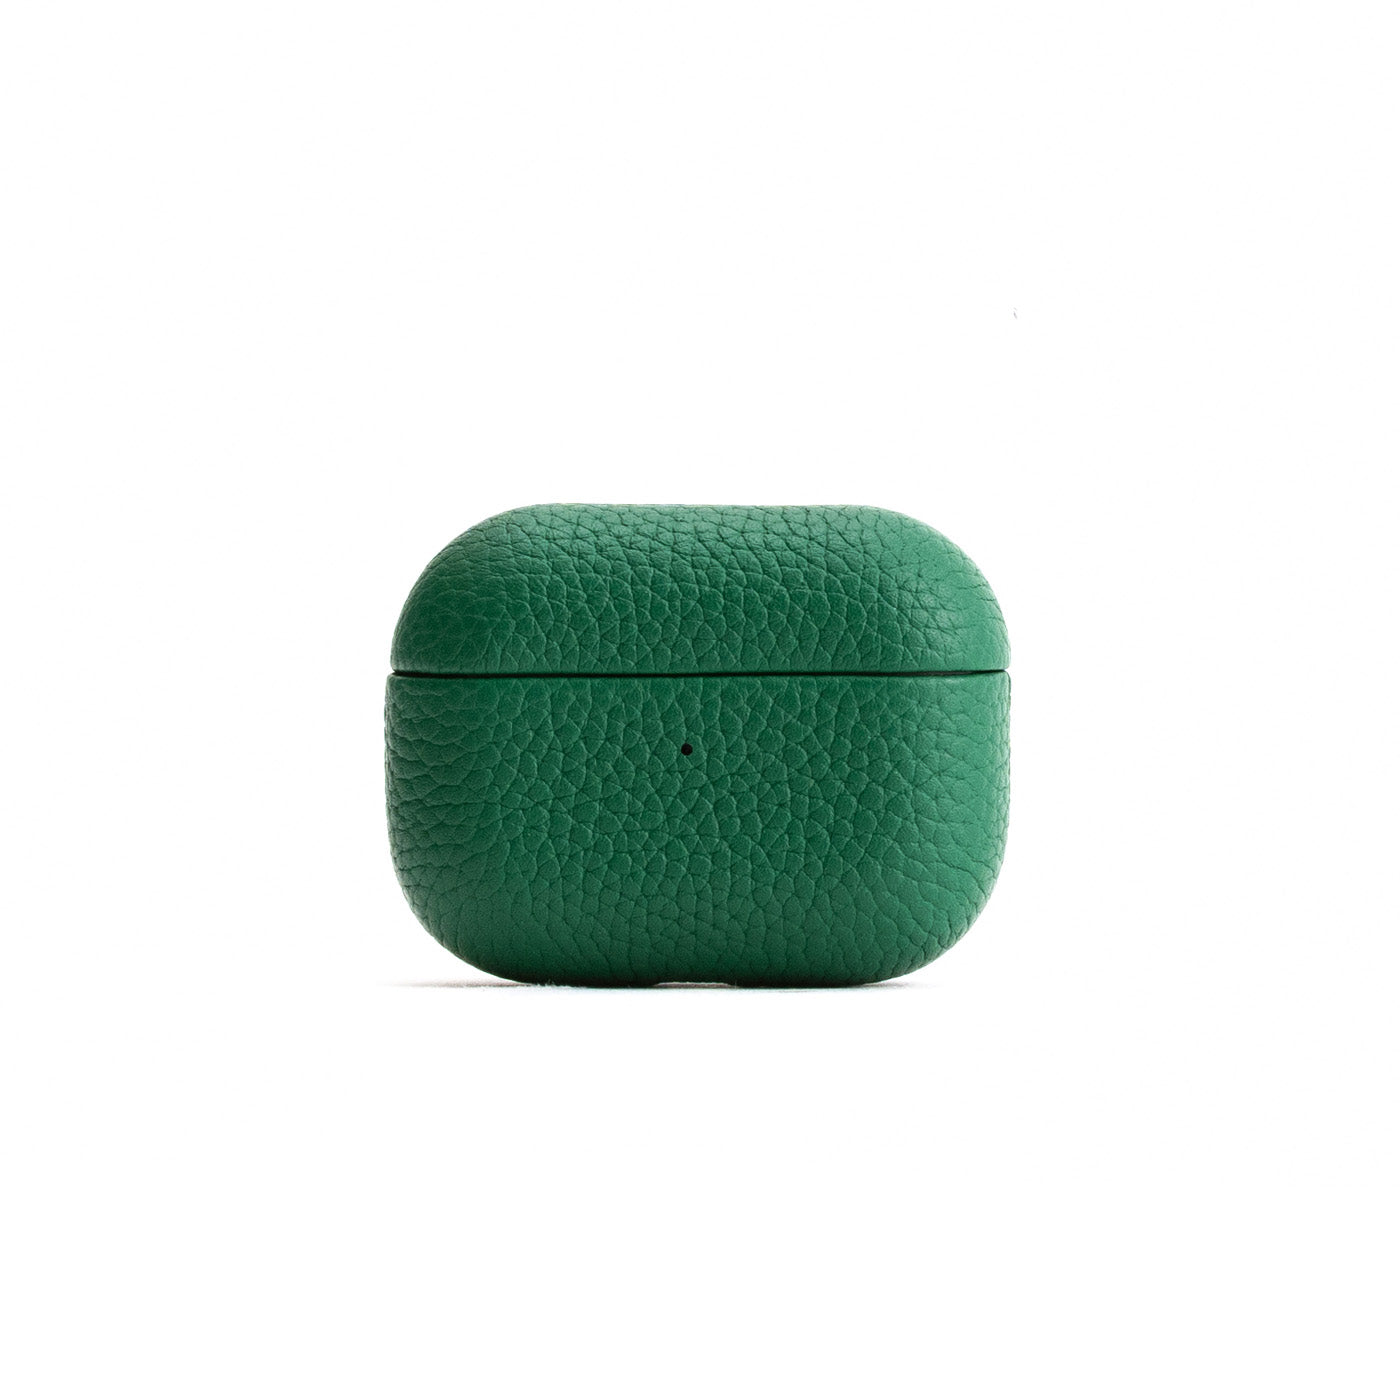 Rainforest | Leather cover for airpod case back